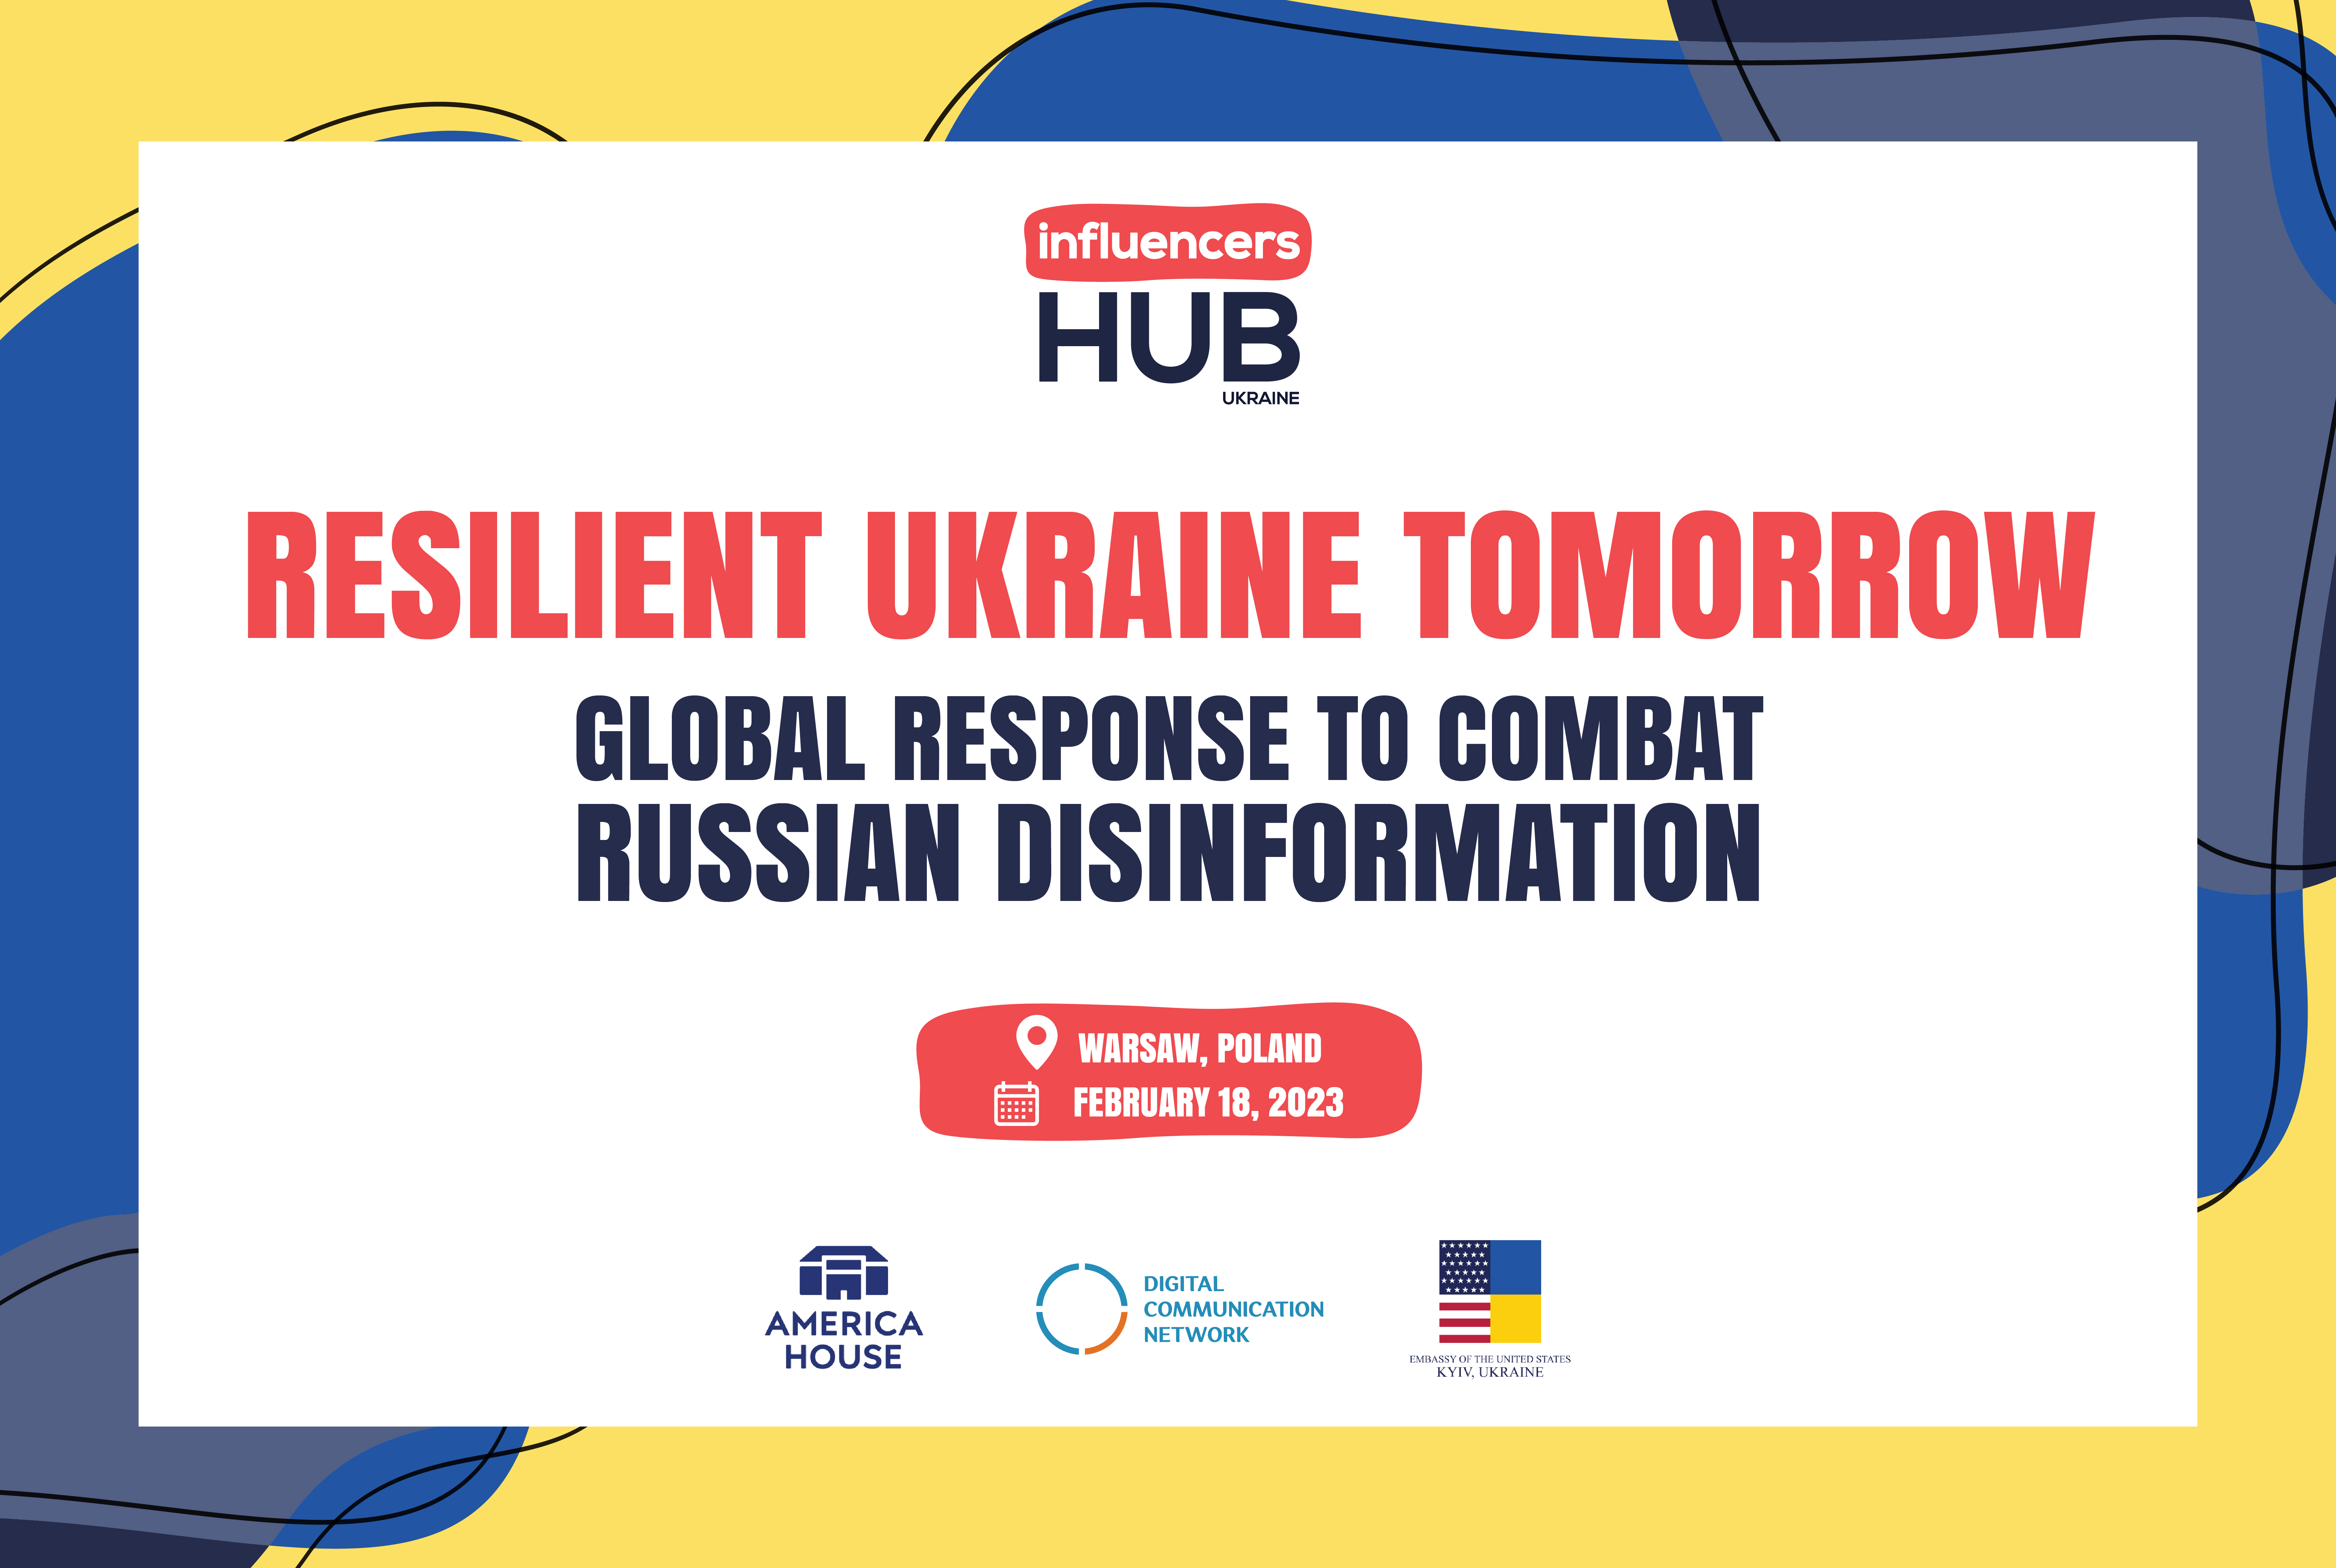 Conference |“Resilient Ukraine Tomorrow: Global Response to Combat Russian Disinformation”